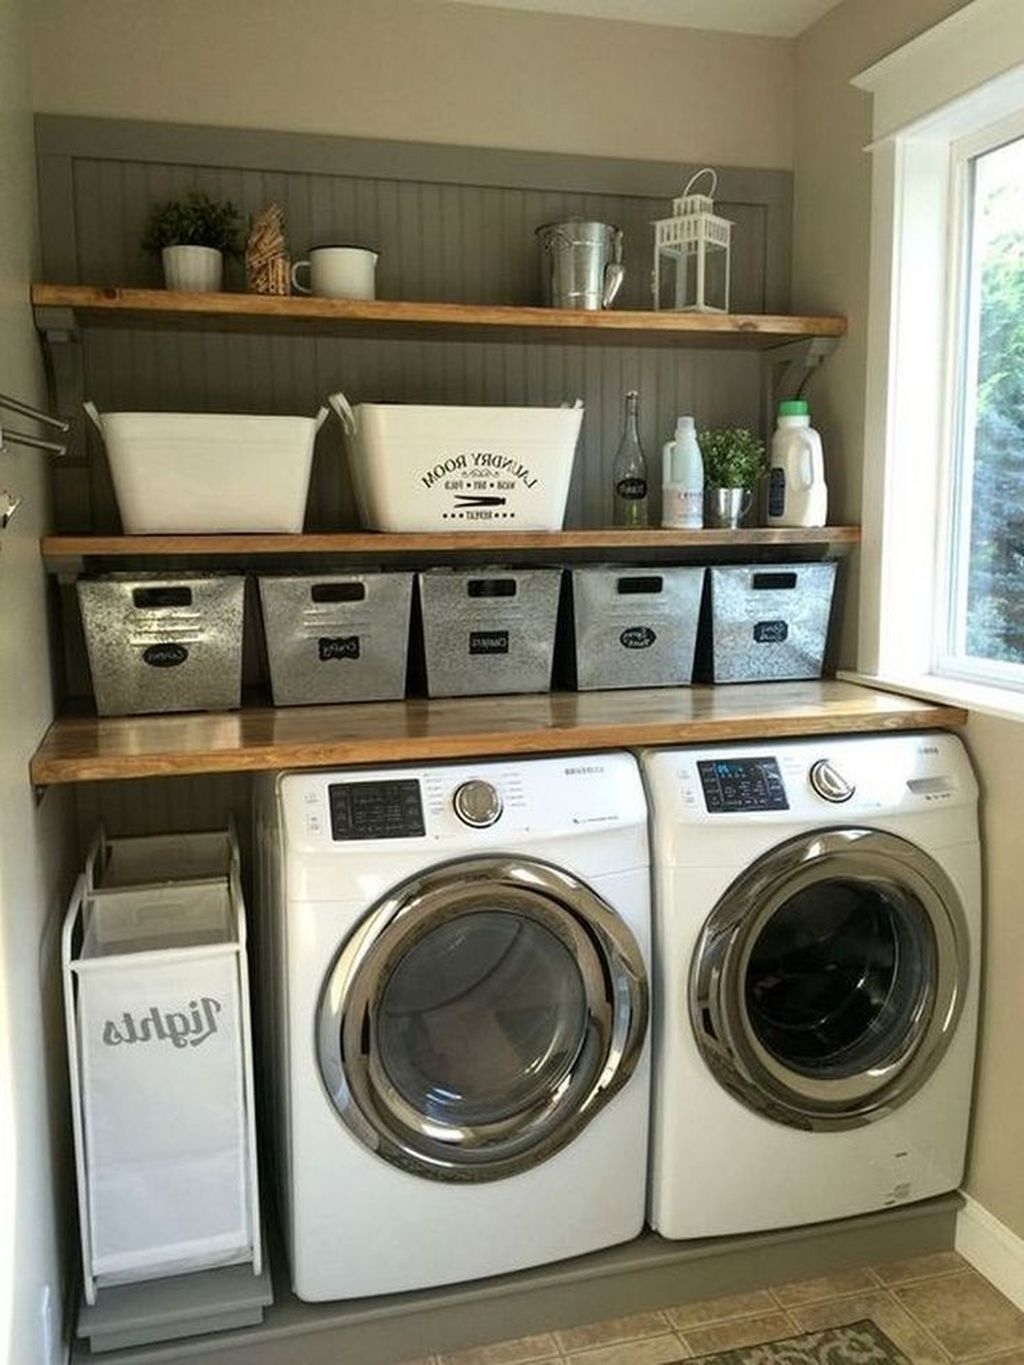 Inspiring Laundry Room Design With French Country Style 44